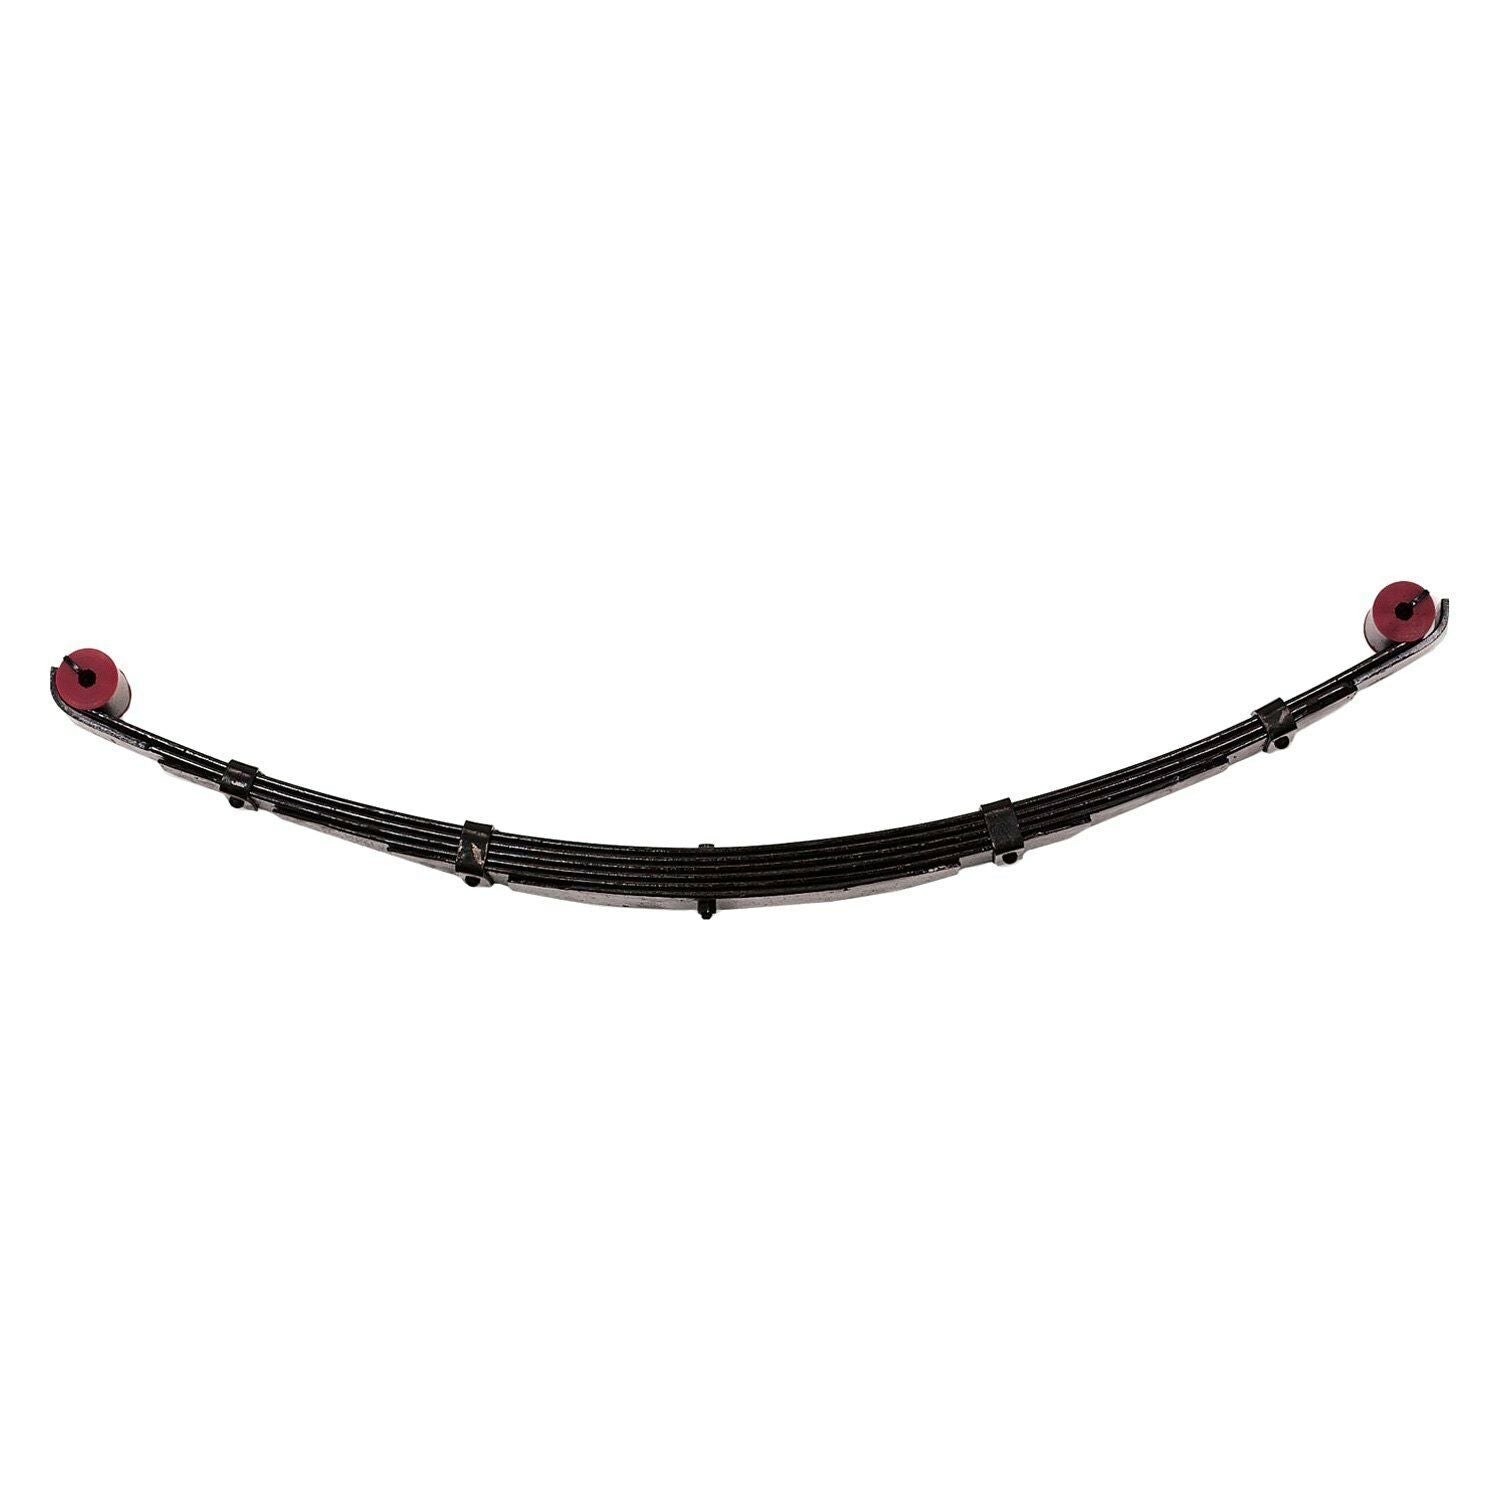 Pro Comp Suspension Fits 69-87 Chevy/GMC Single Rear Leaf Spring 6" Lift-13611